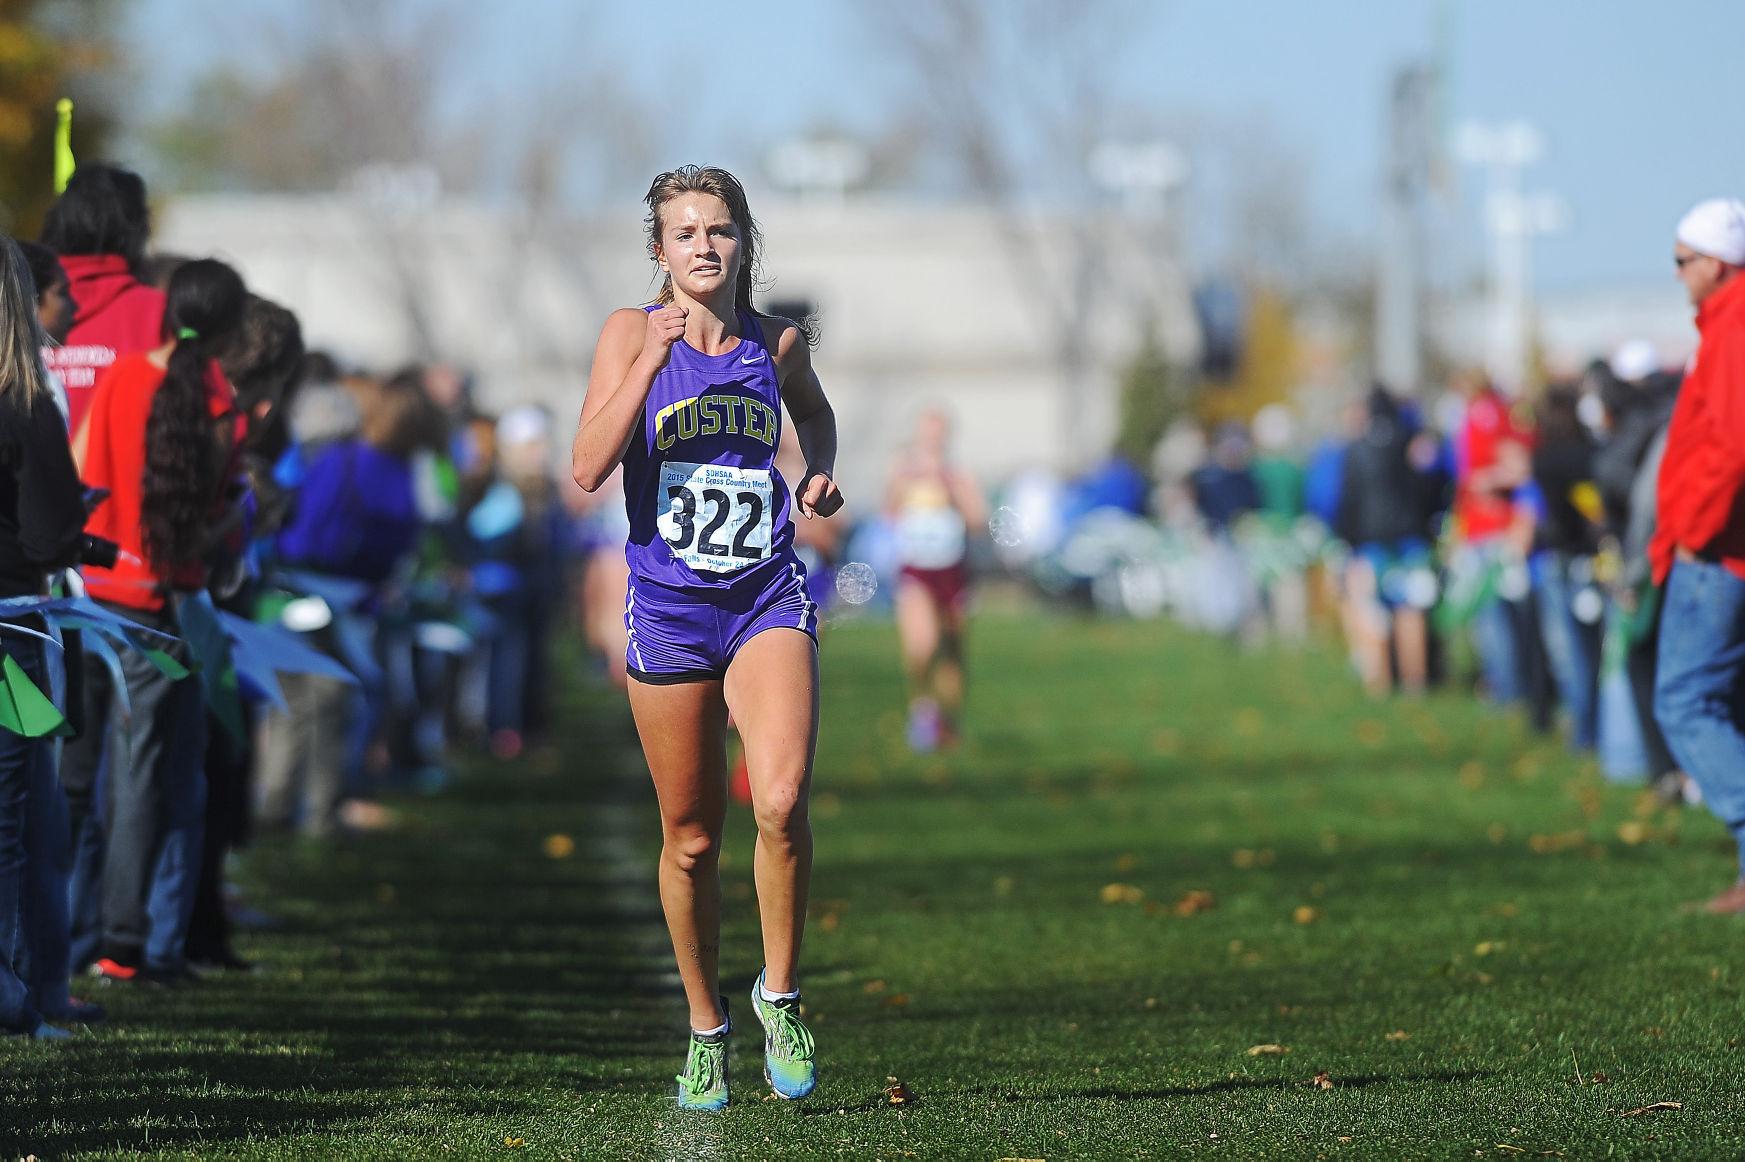 State cross country Custer girls, Chance Dooley win state titles Sports